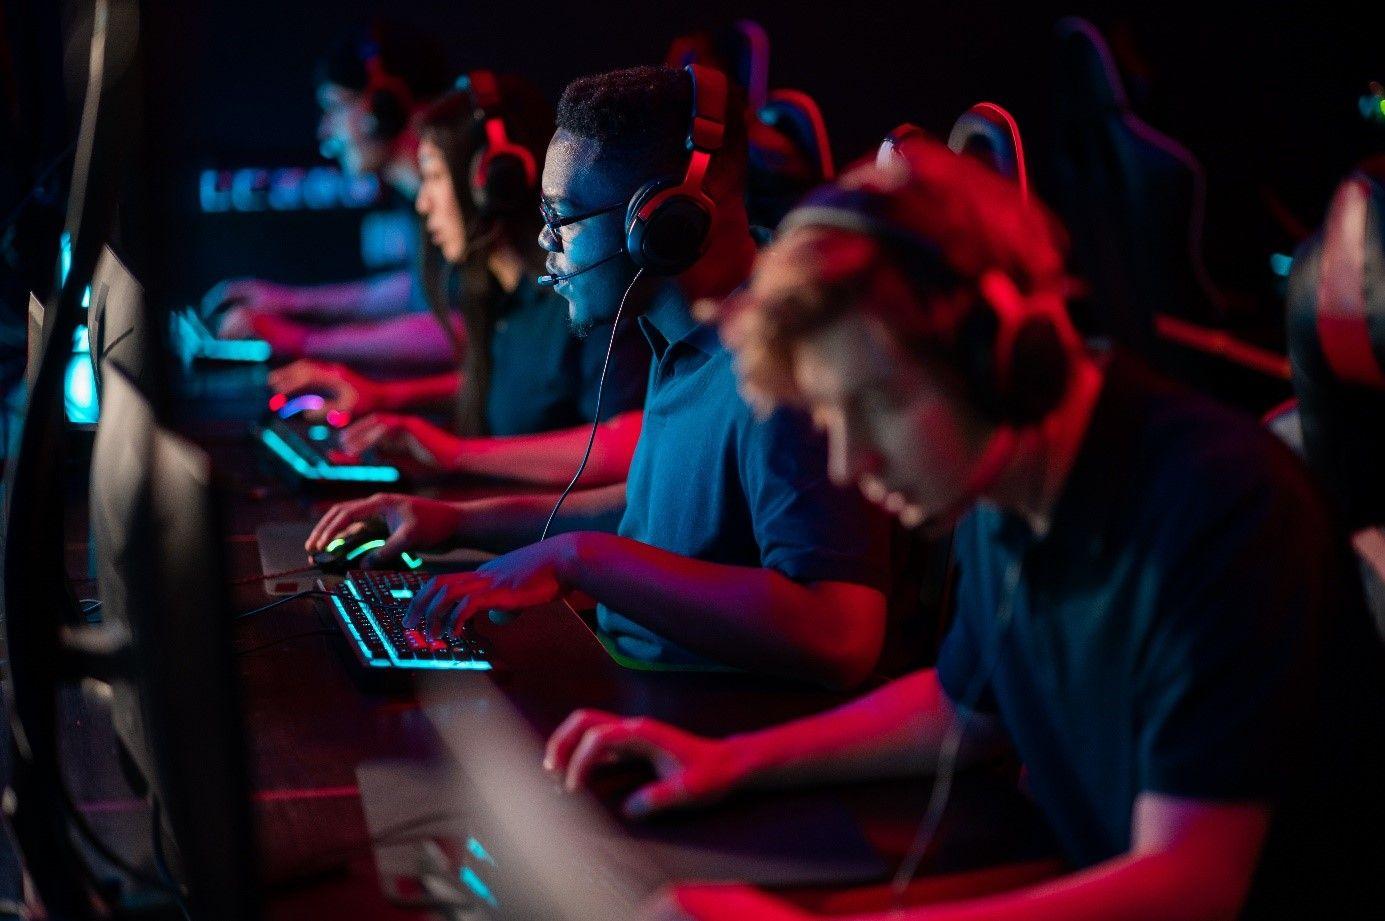 The Link between Traditional Sport and eSports - An Analysis